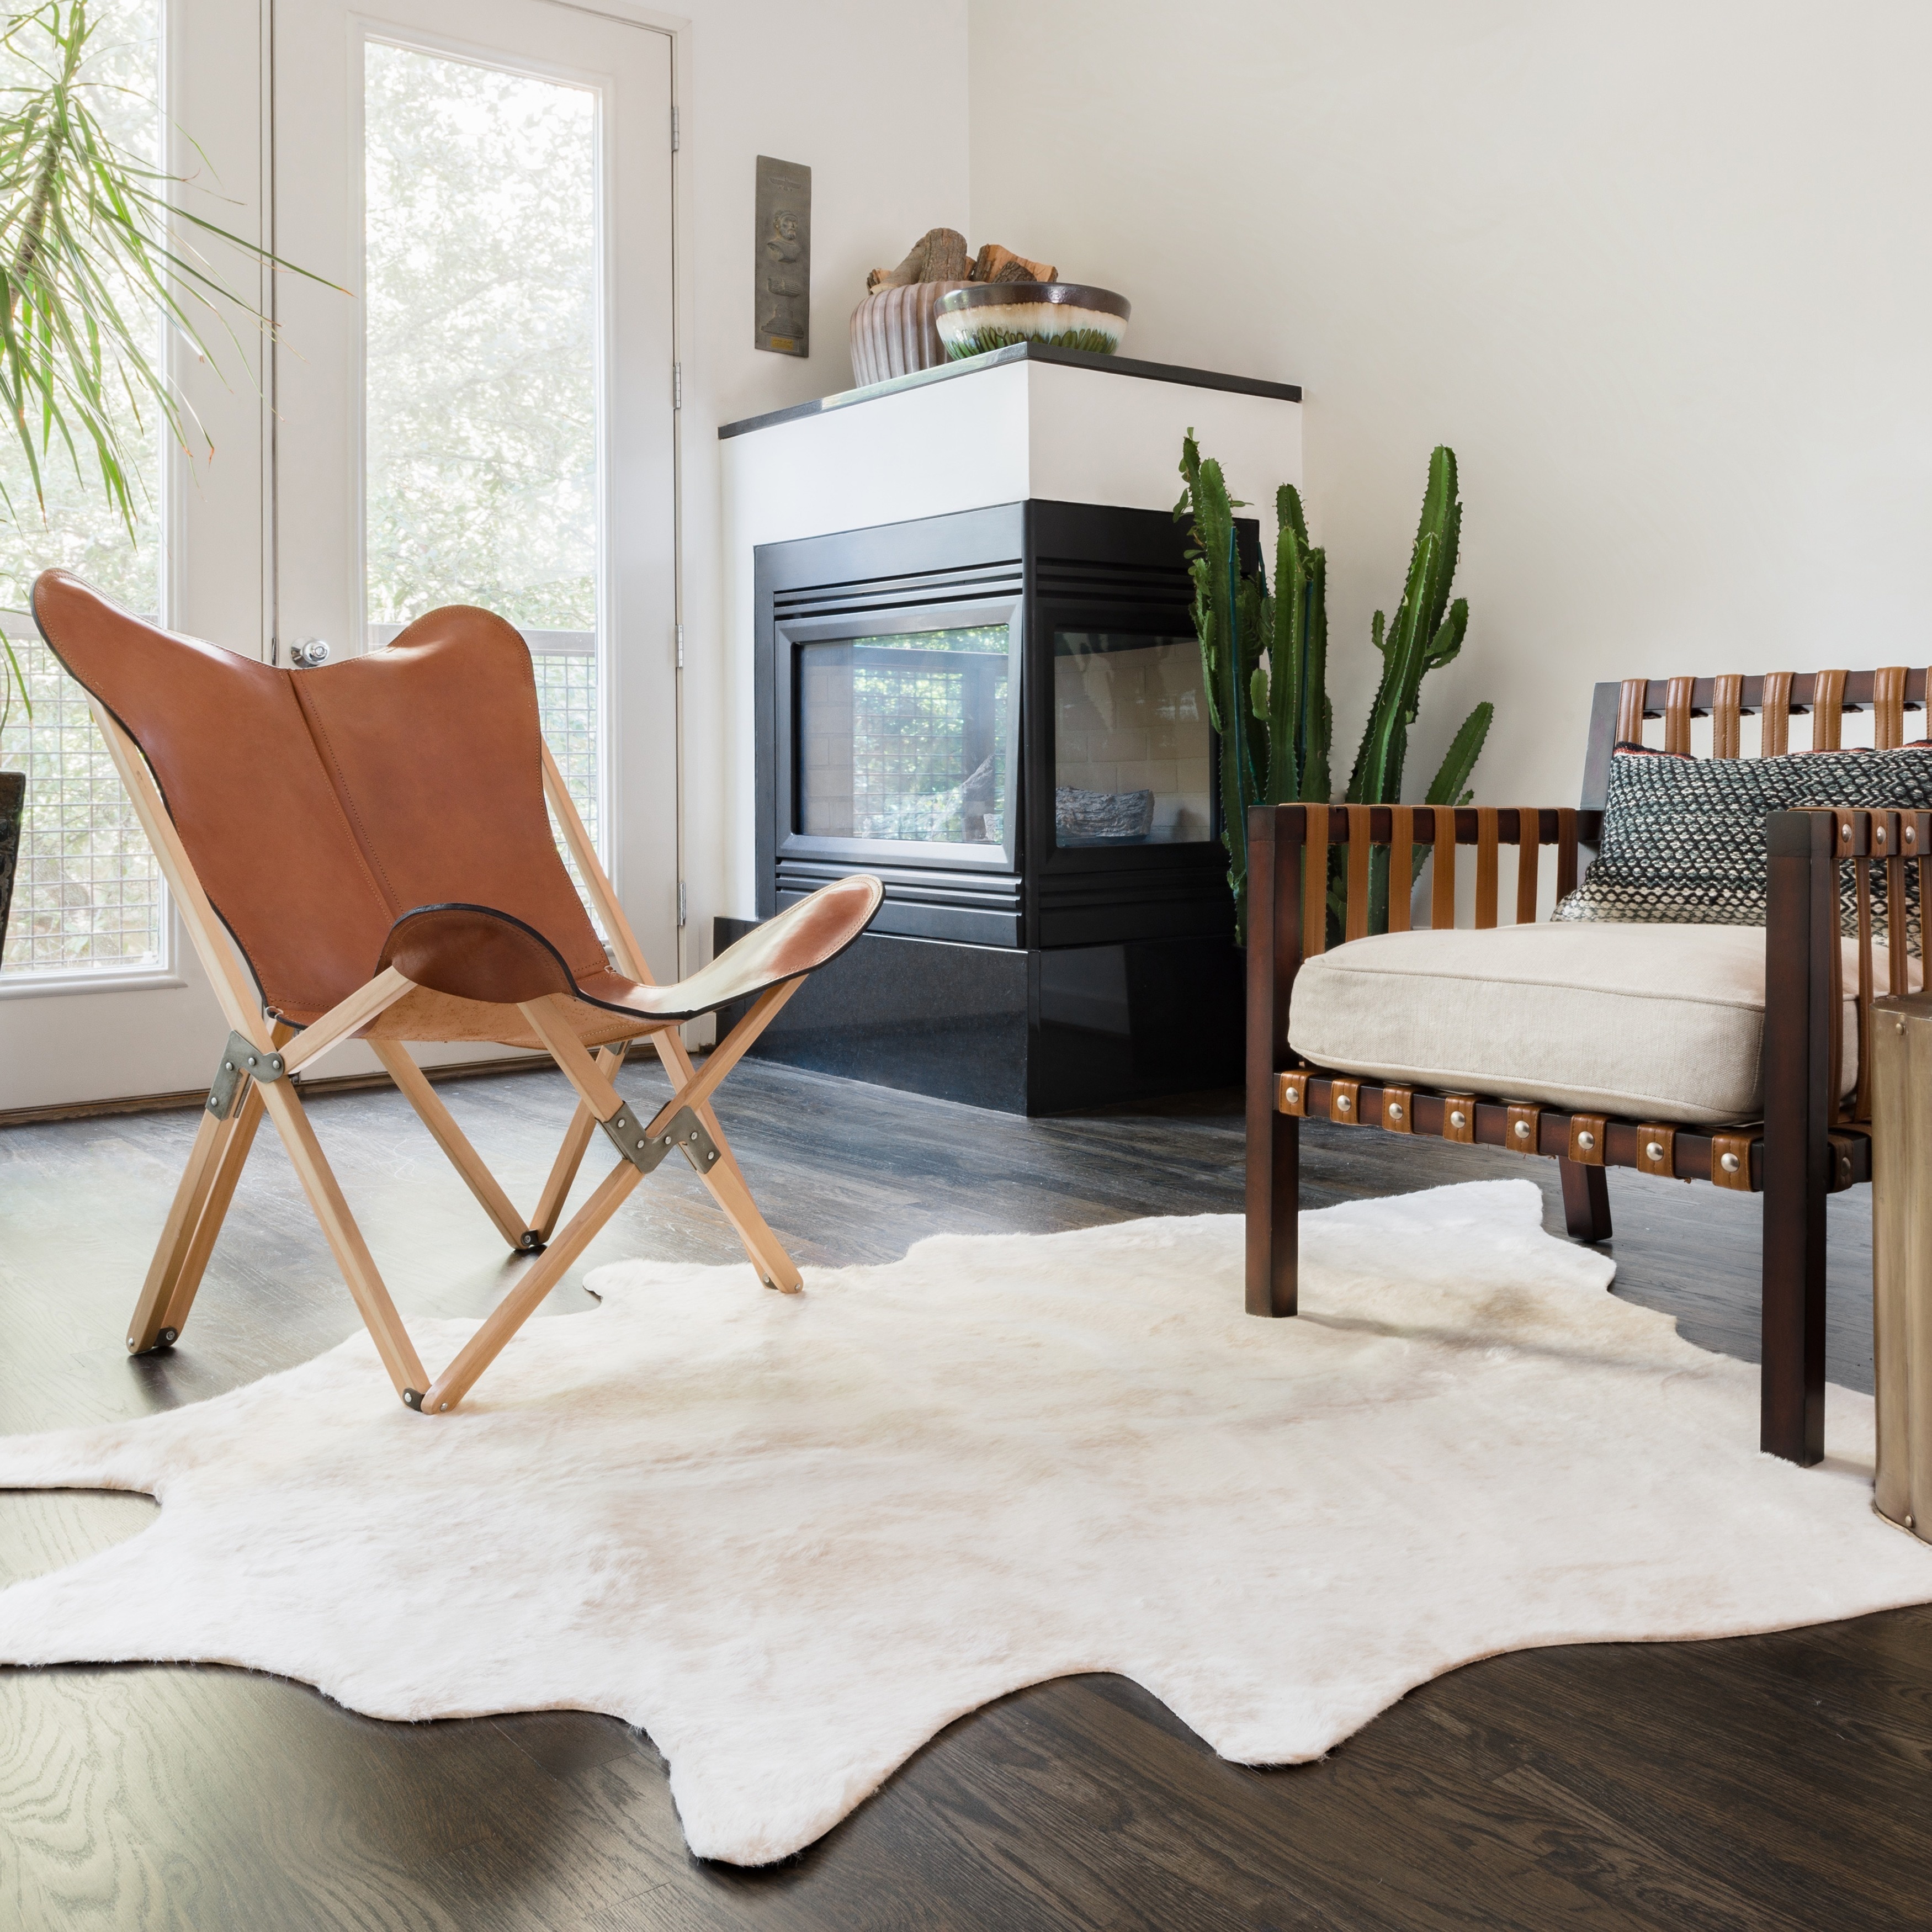 Shop Faux Cowhide Area Rug On Sale Overstock 9775358